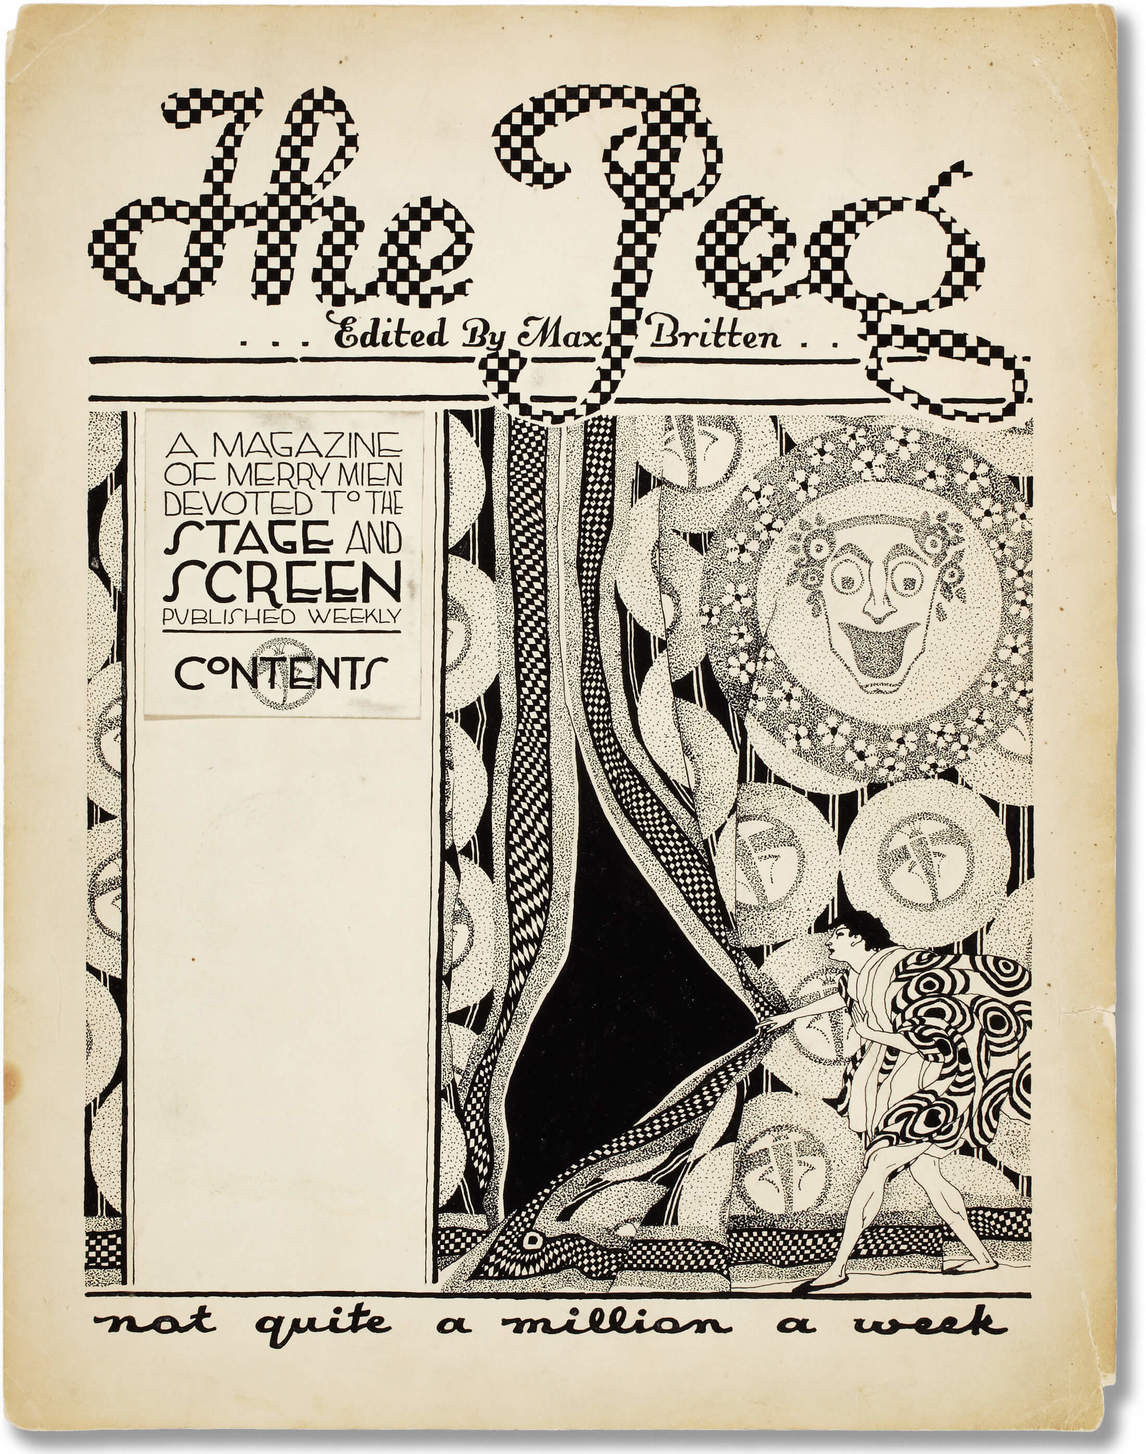  Page couverture de The Peg: A Magazine of Merry Mien Devoted to the Stage and Screen, v.1915-21